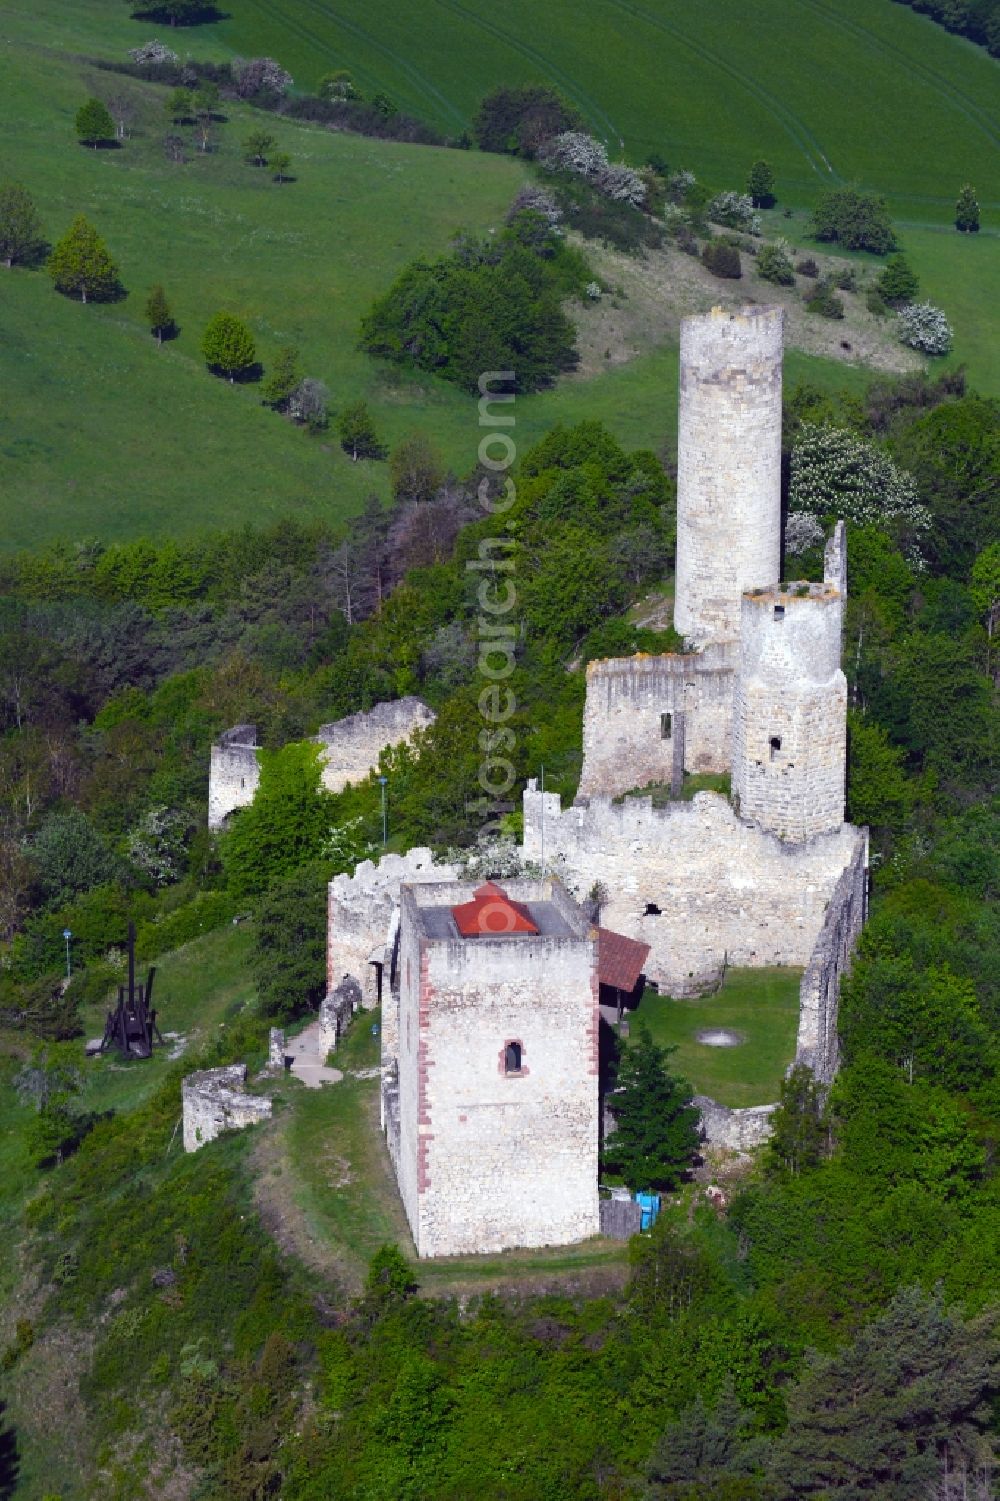 Gerstungen from above - Ruins and vestiges of the former castle Brandenburg in Gerstungen in the state Thuringia, Germany